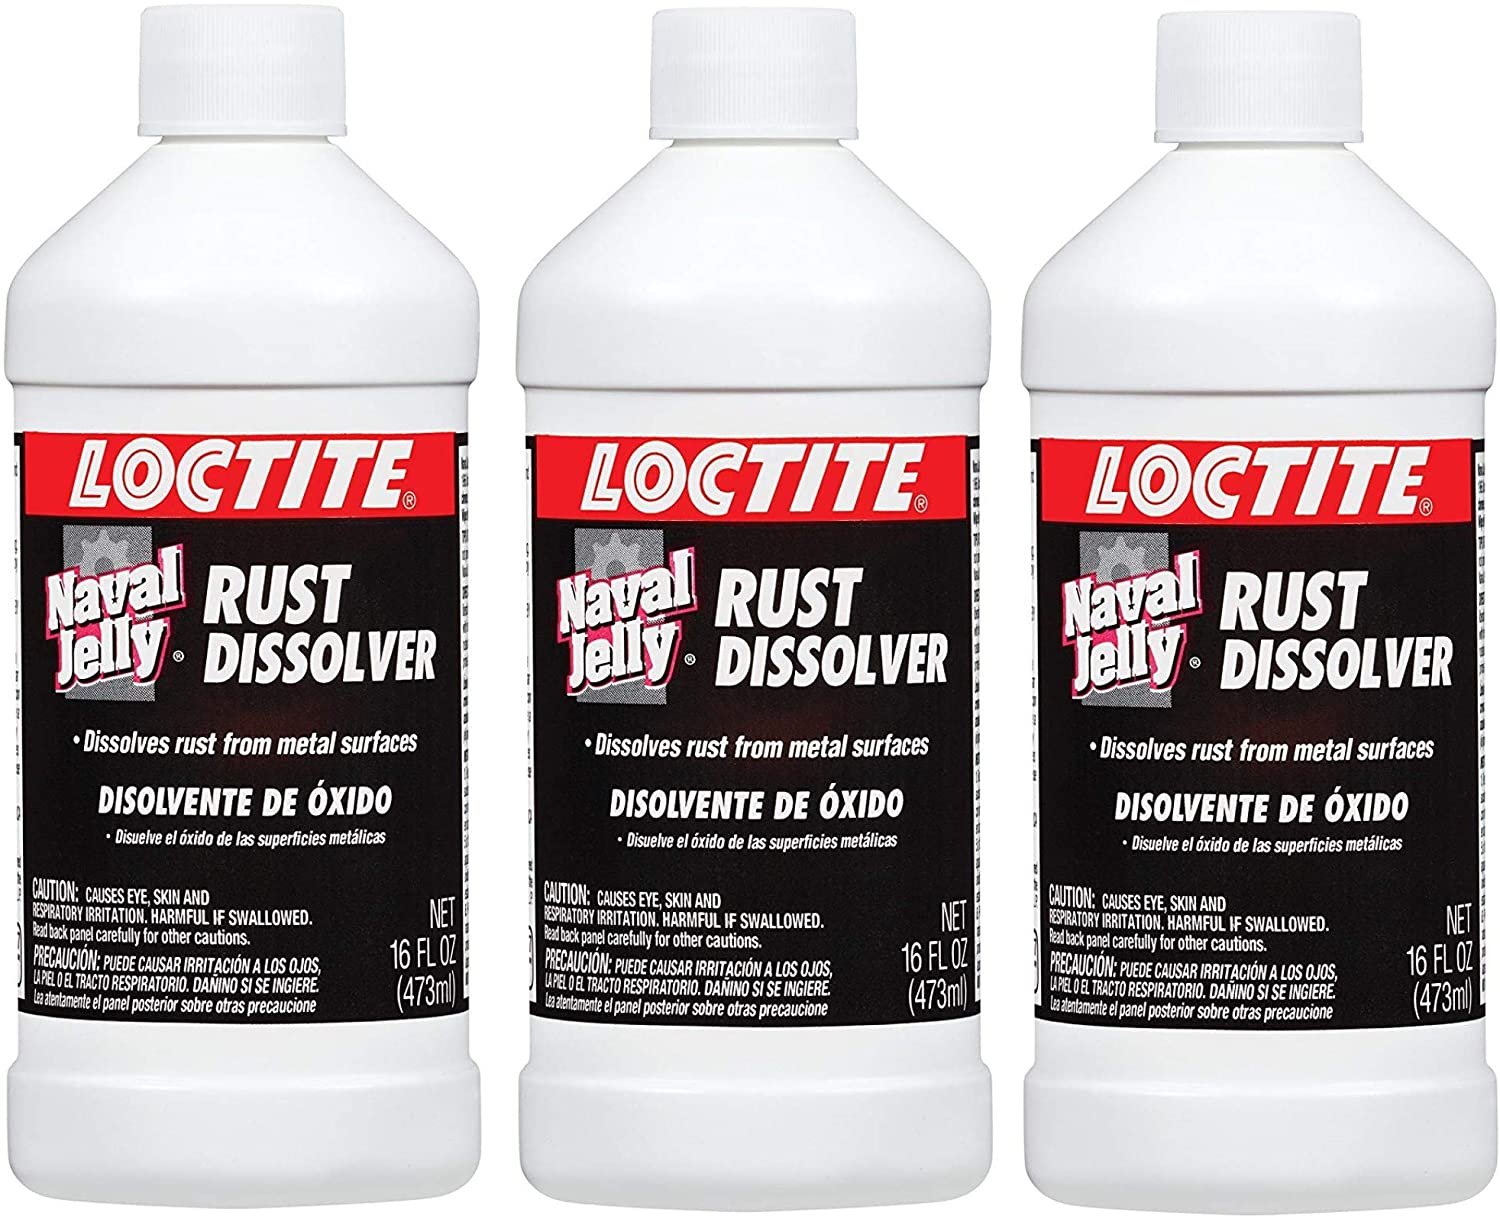 How to Use Loctite Rust Dissolver Naval Jelly 